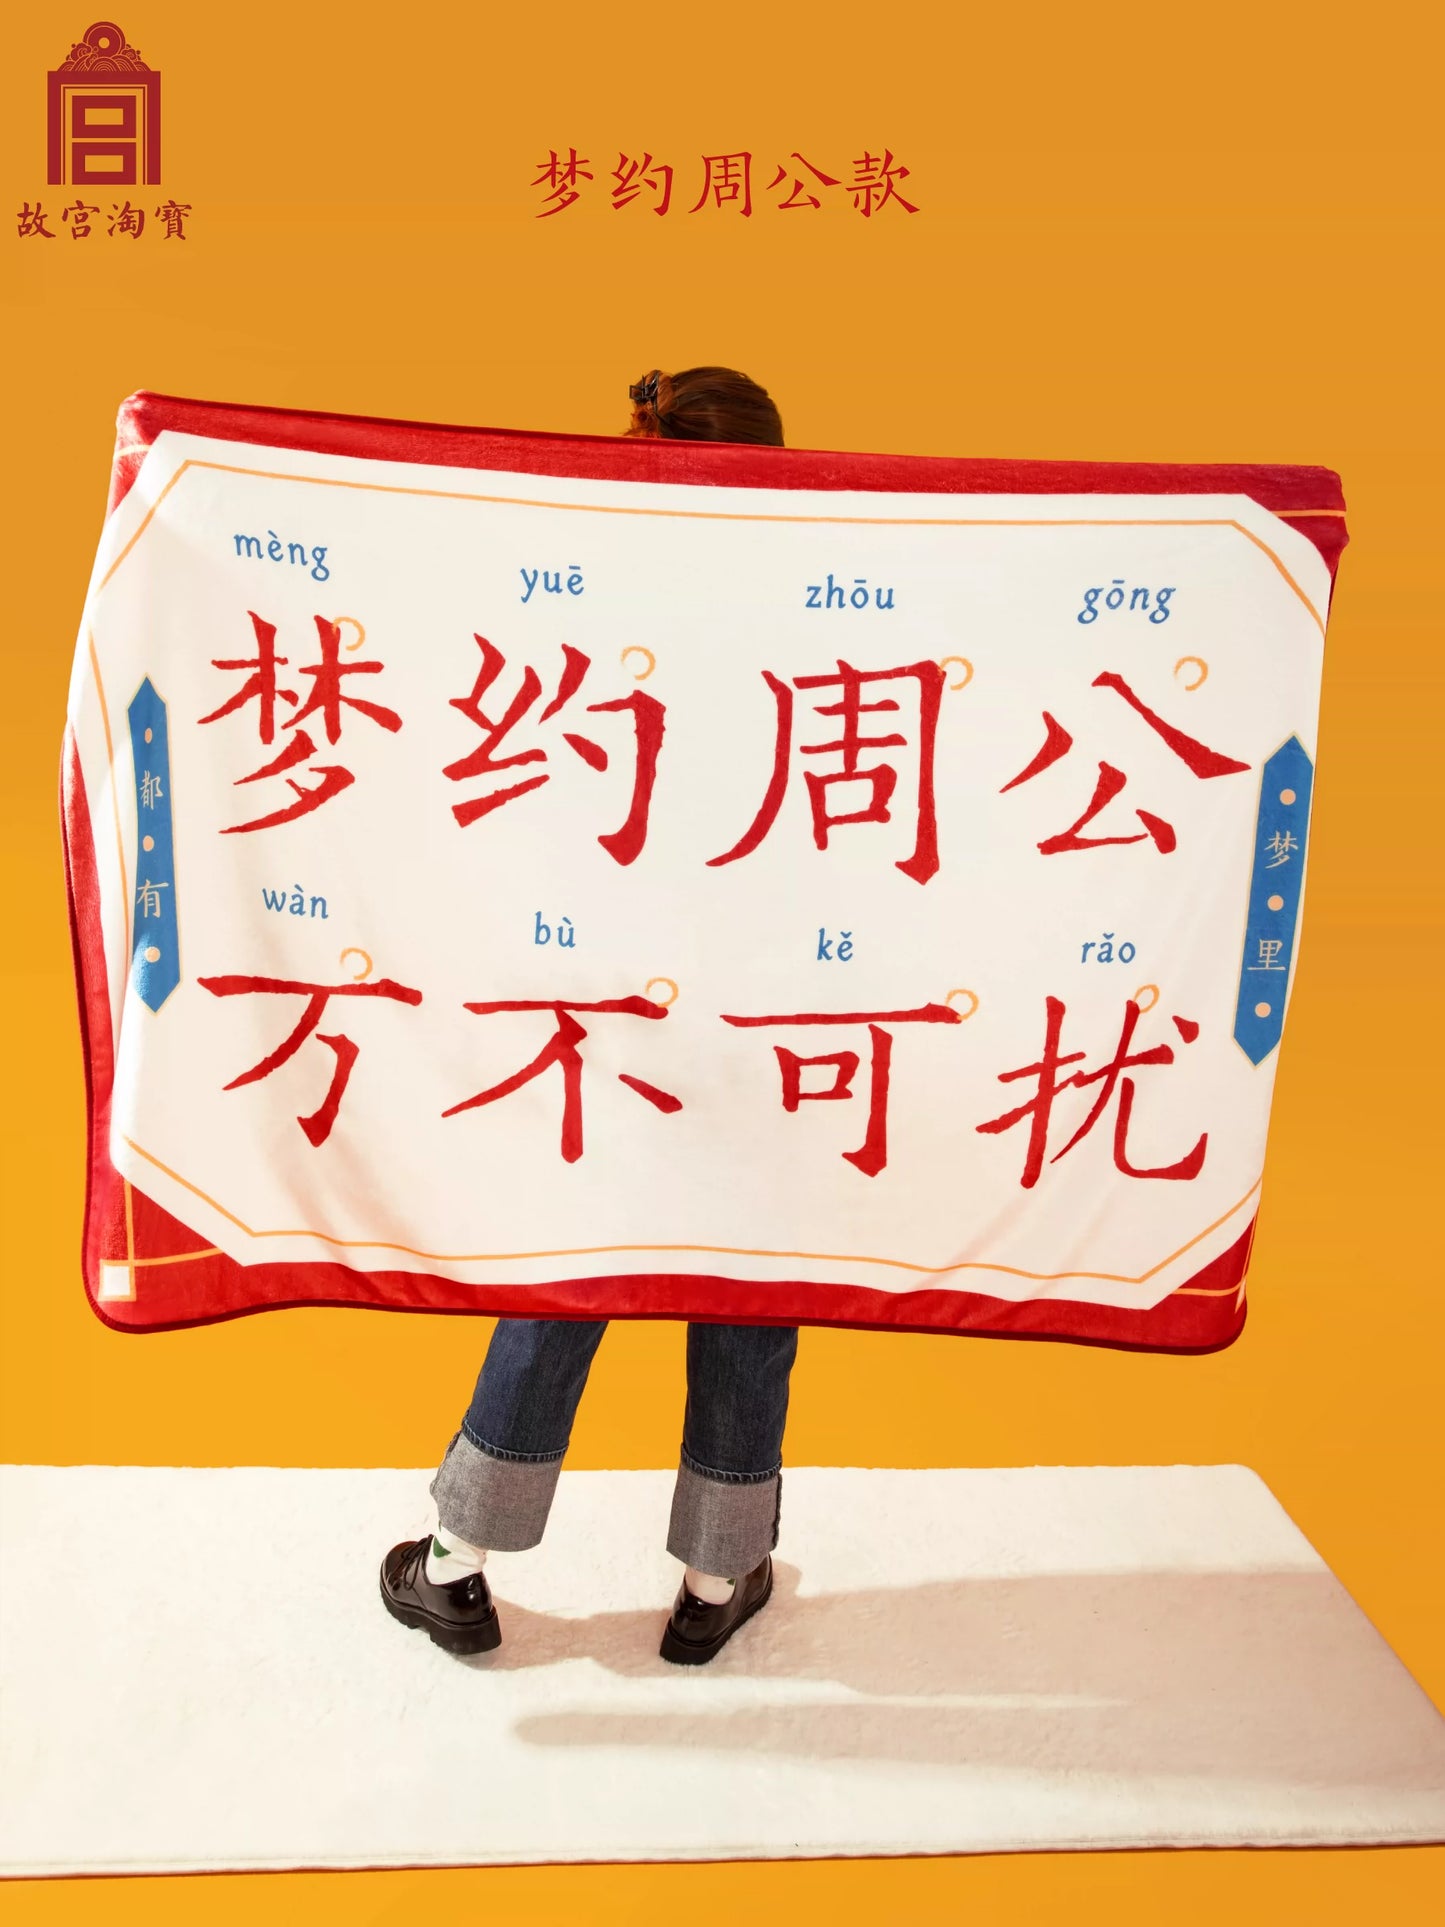 Palace Museum rest blanket office nap blanket air conditioning blanket Wenchuang birthday gift.